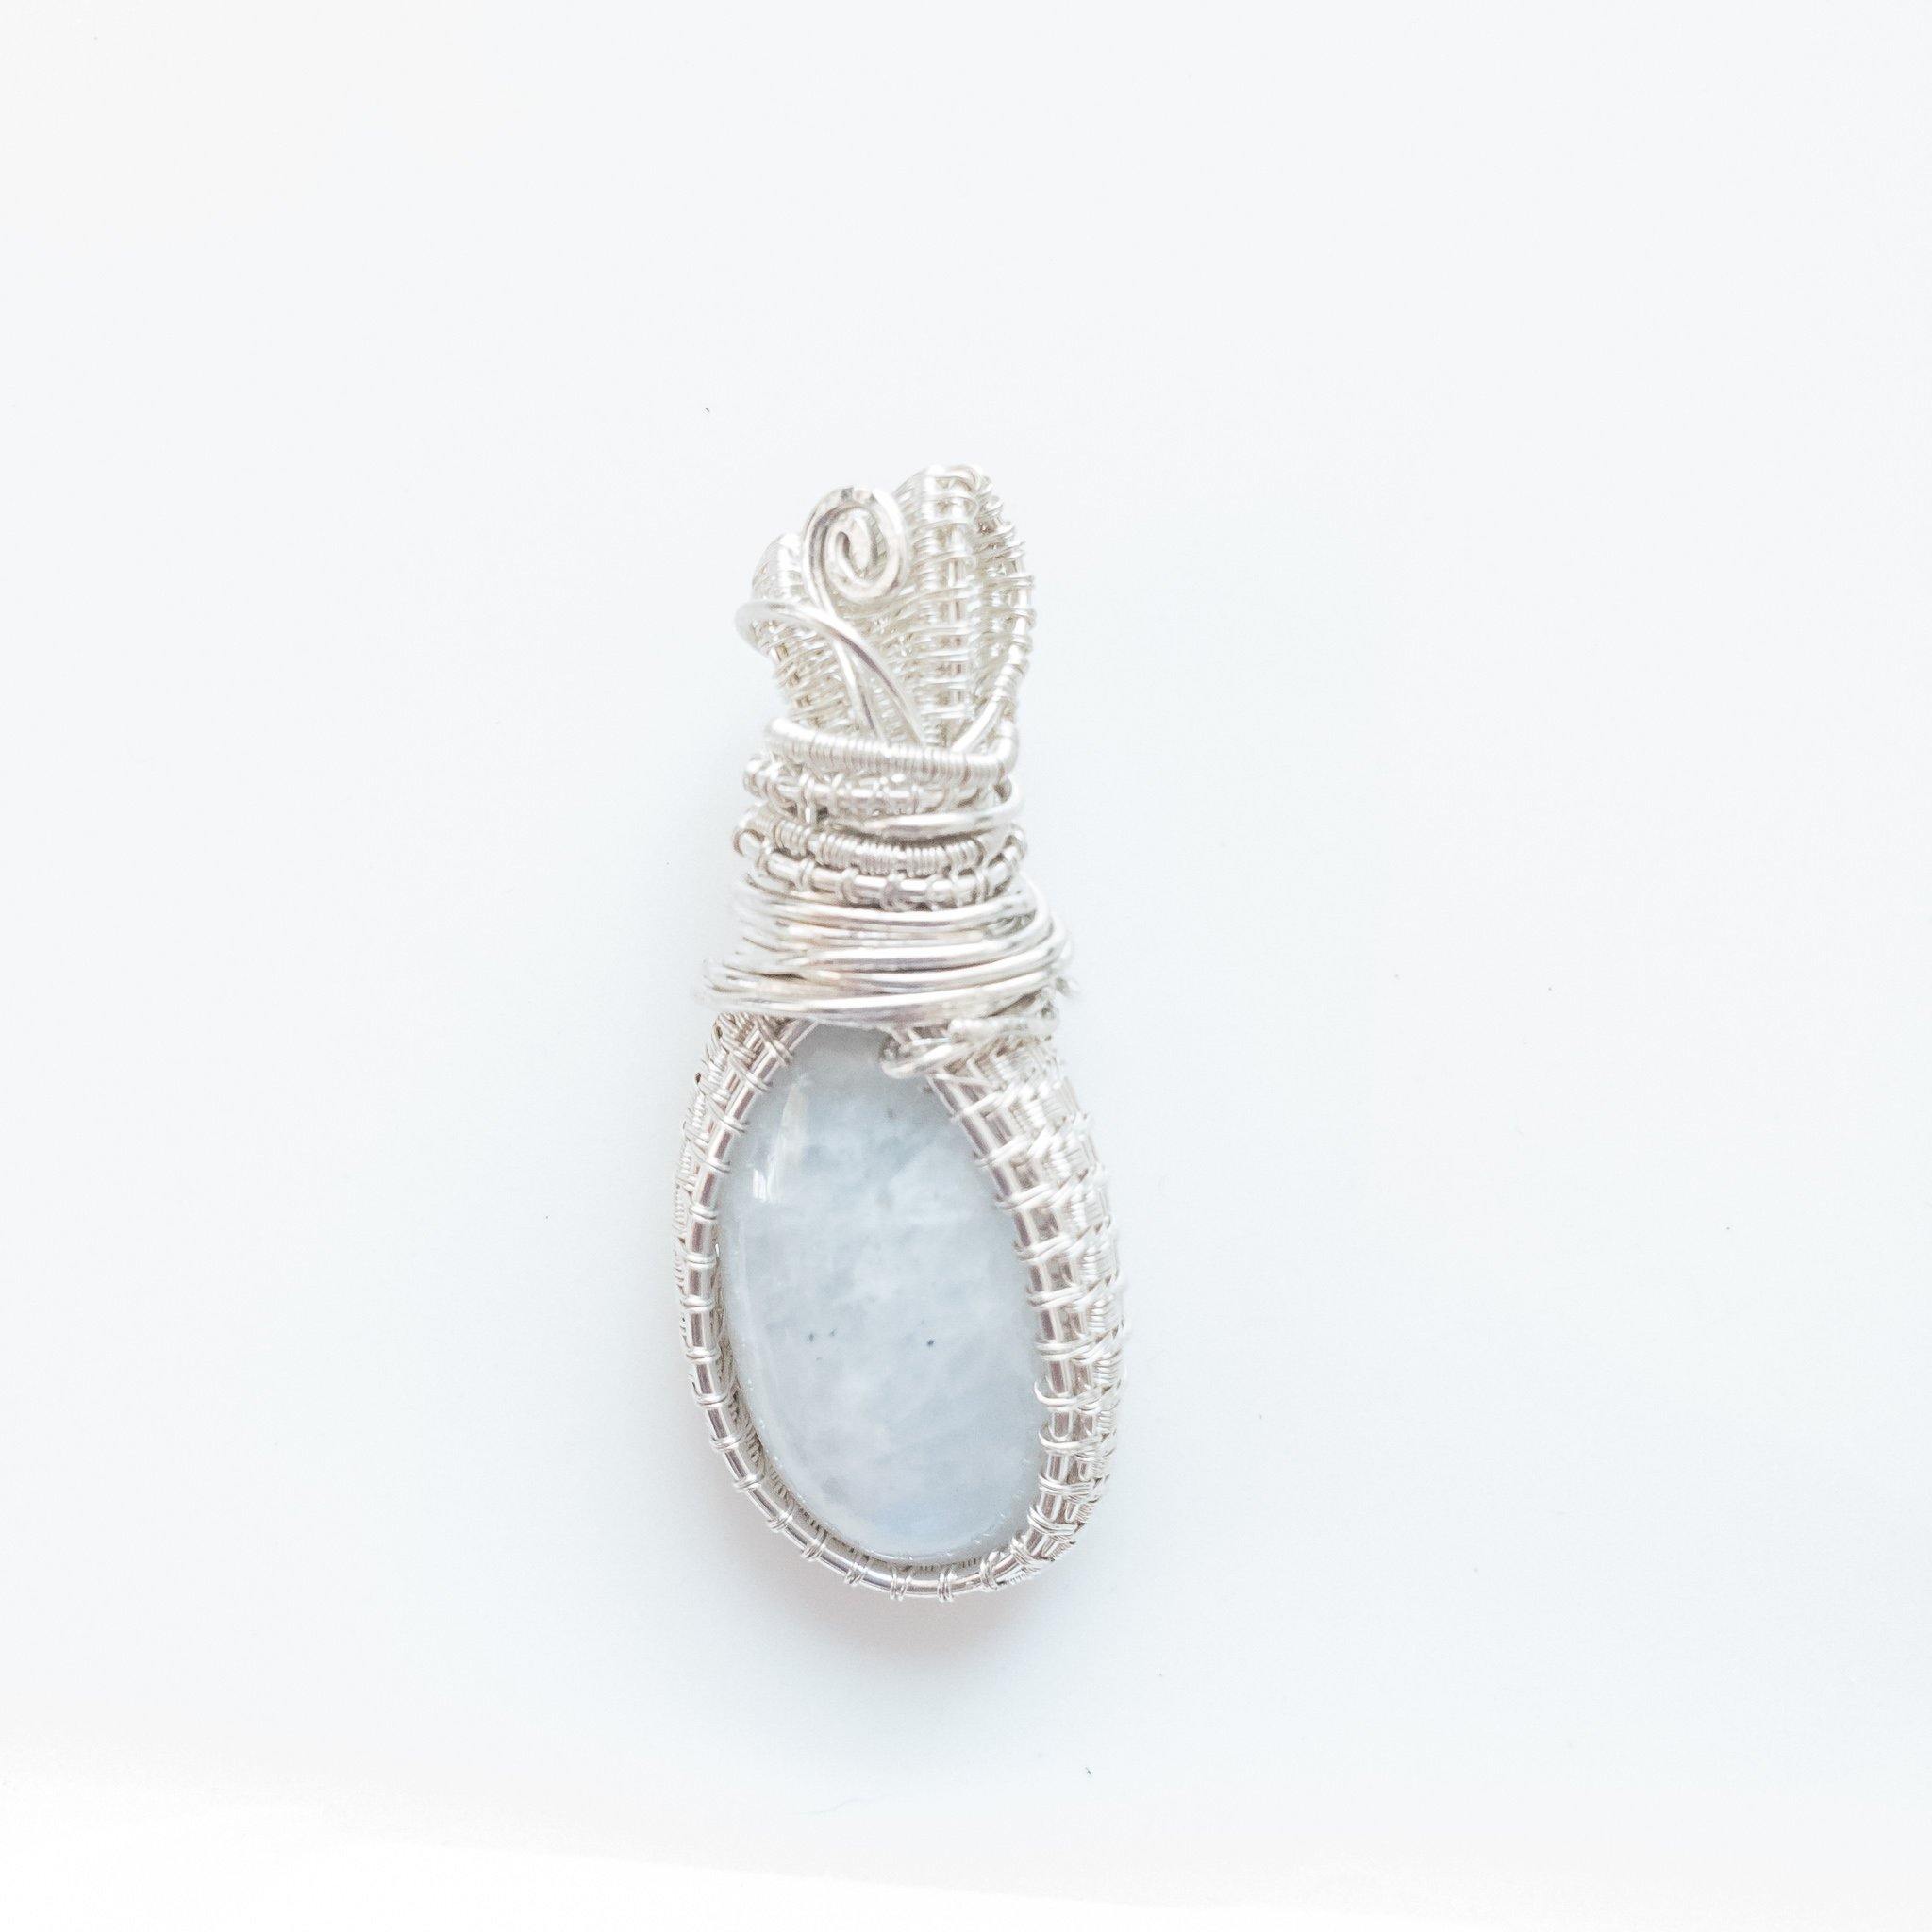 Beautiful Moonstone Necklace Pendant in Sterling Silver - front view - BellaChel Jeweler